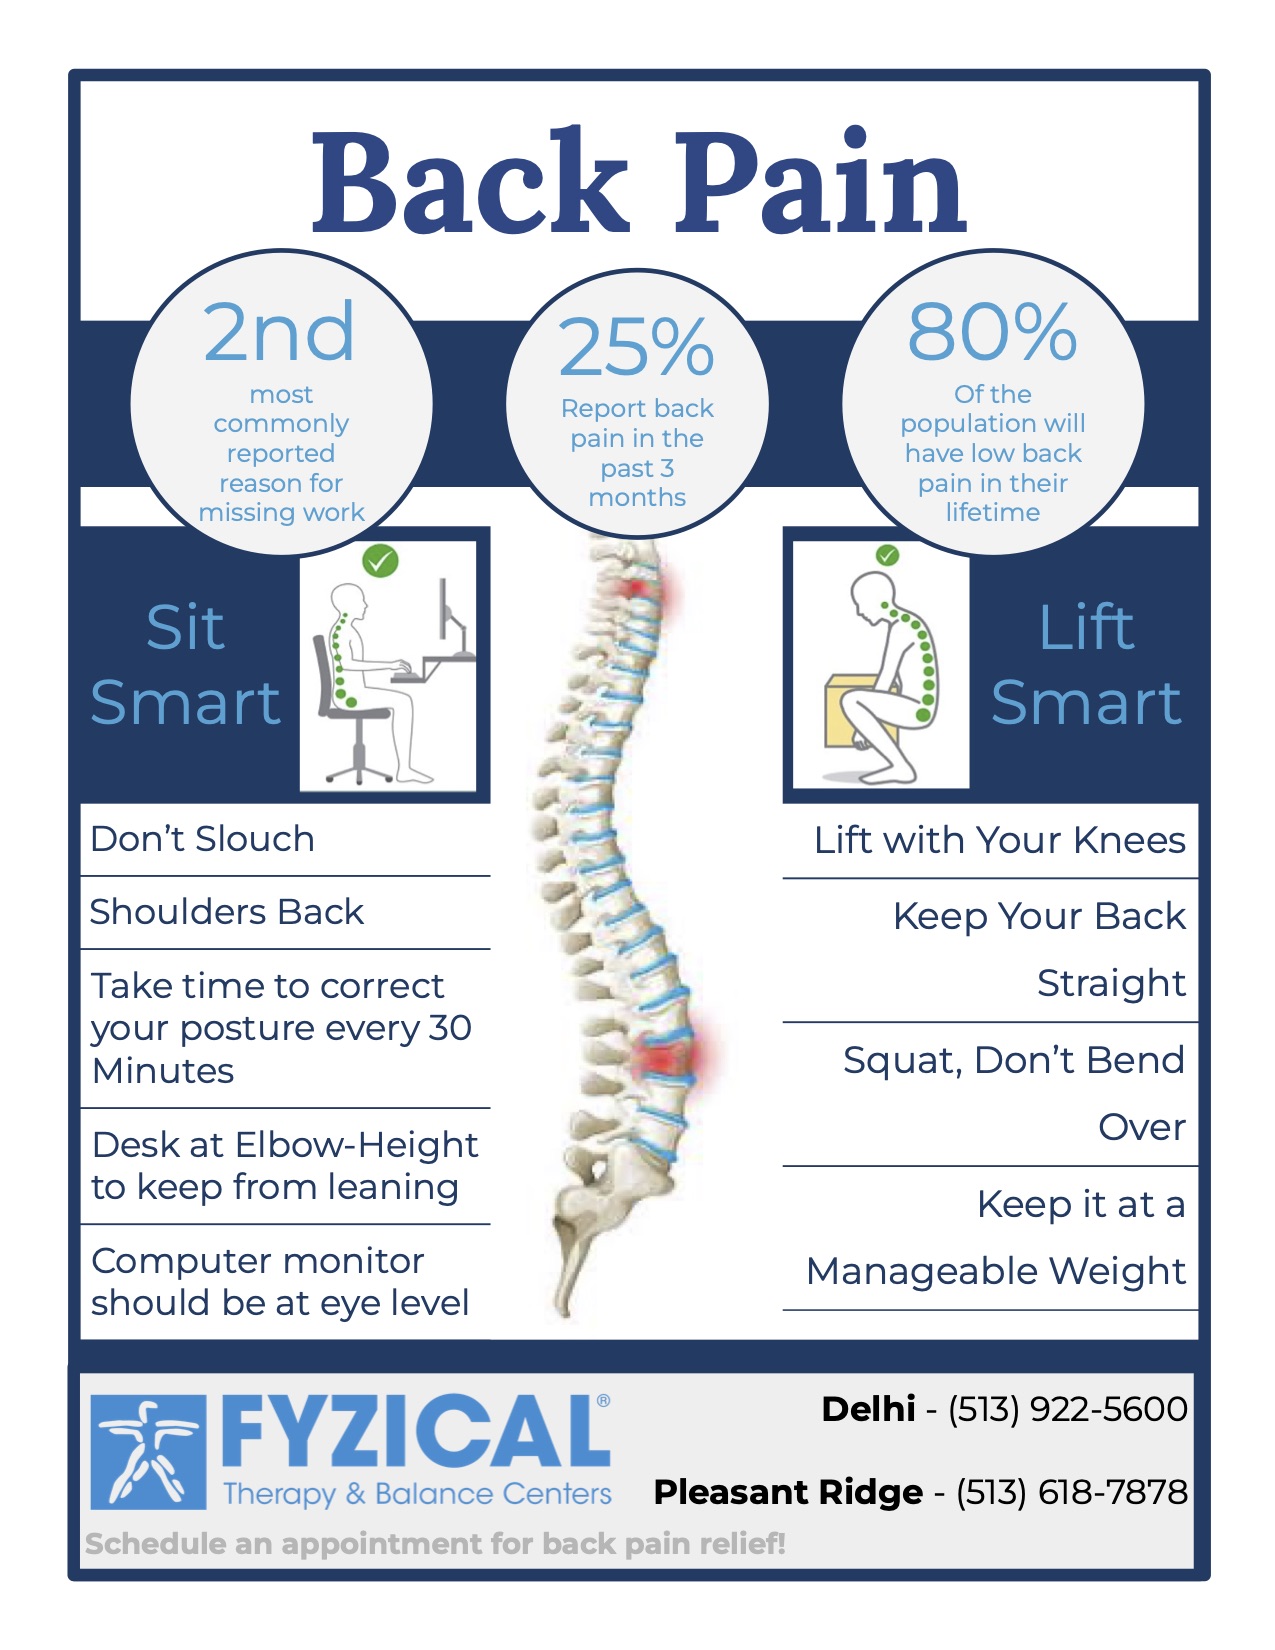 Low Back Pain: How Does Your Physical Therapist Treat Low Back